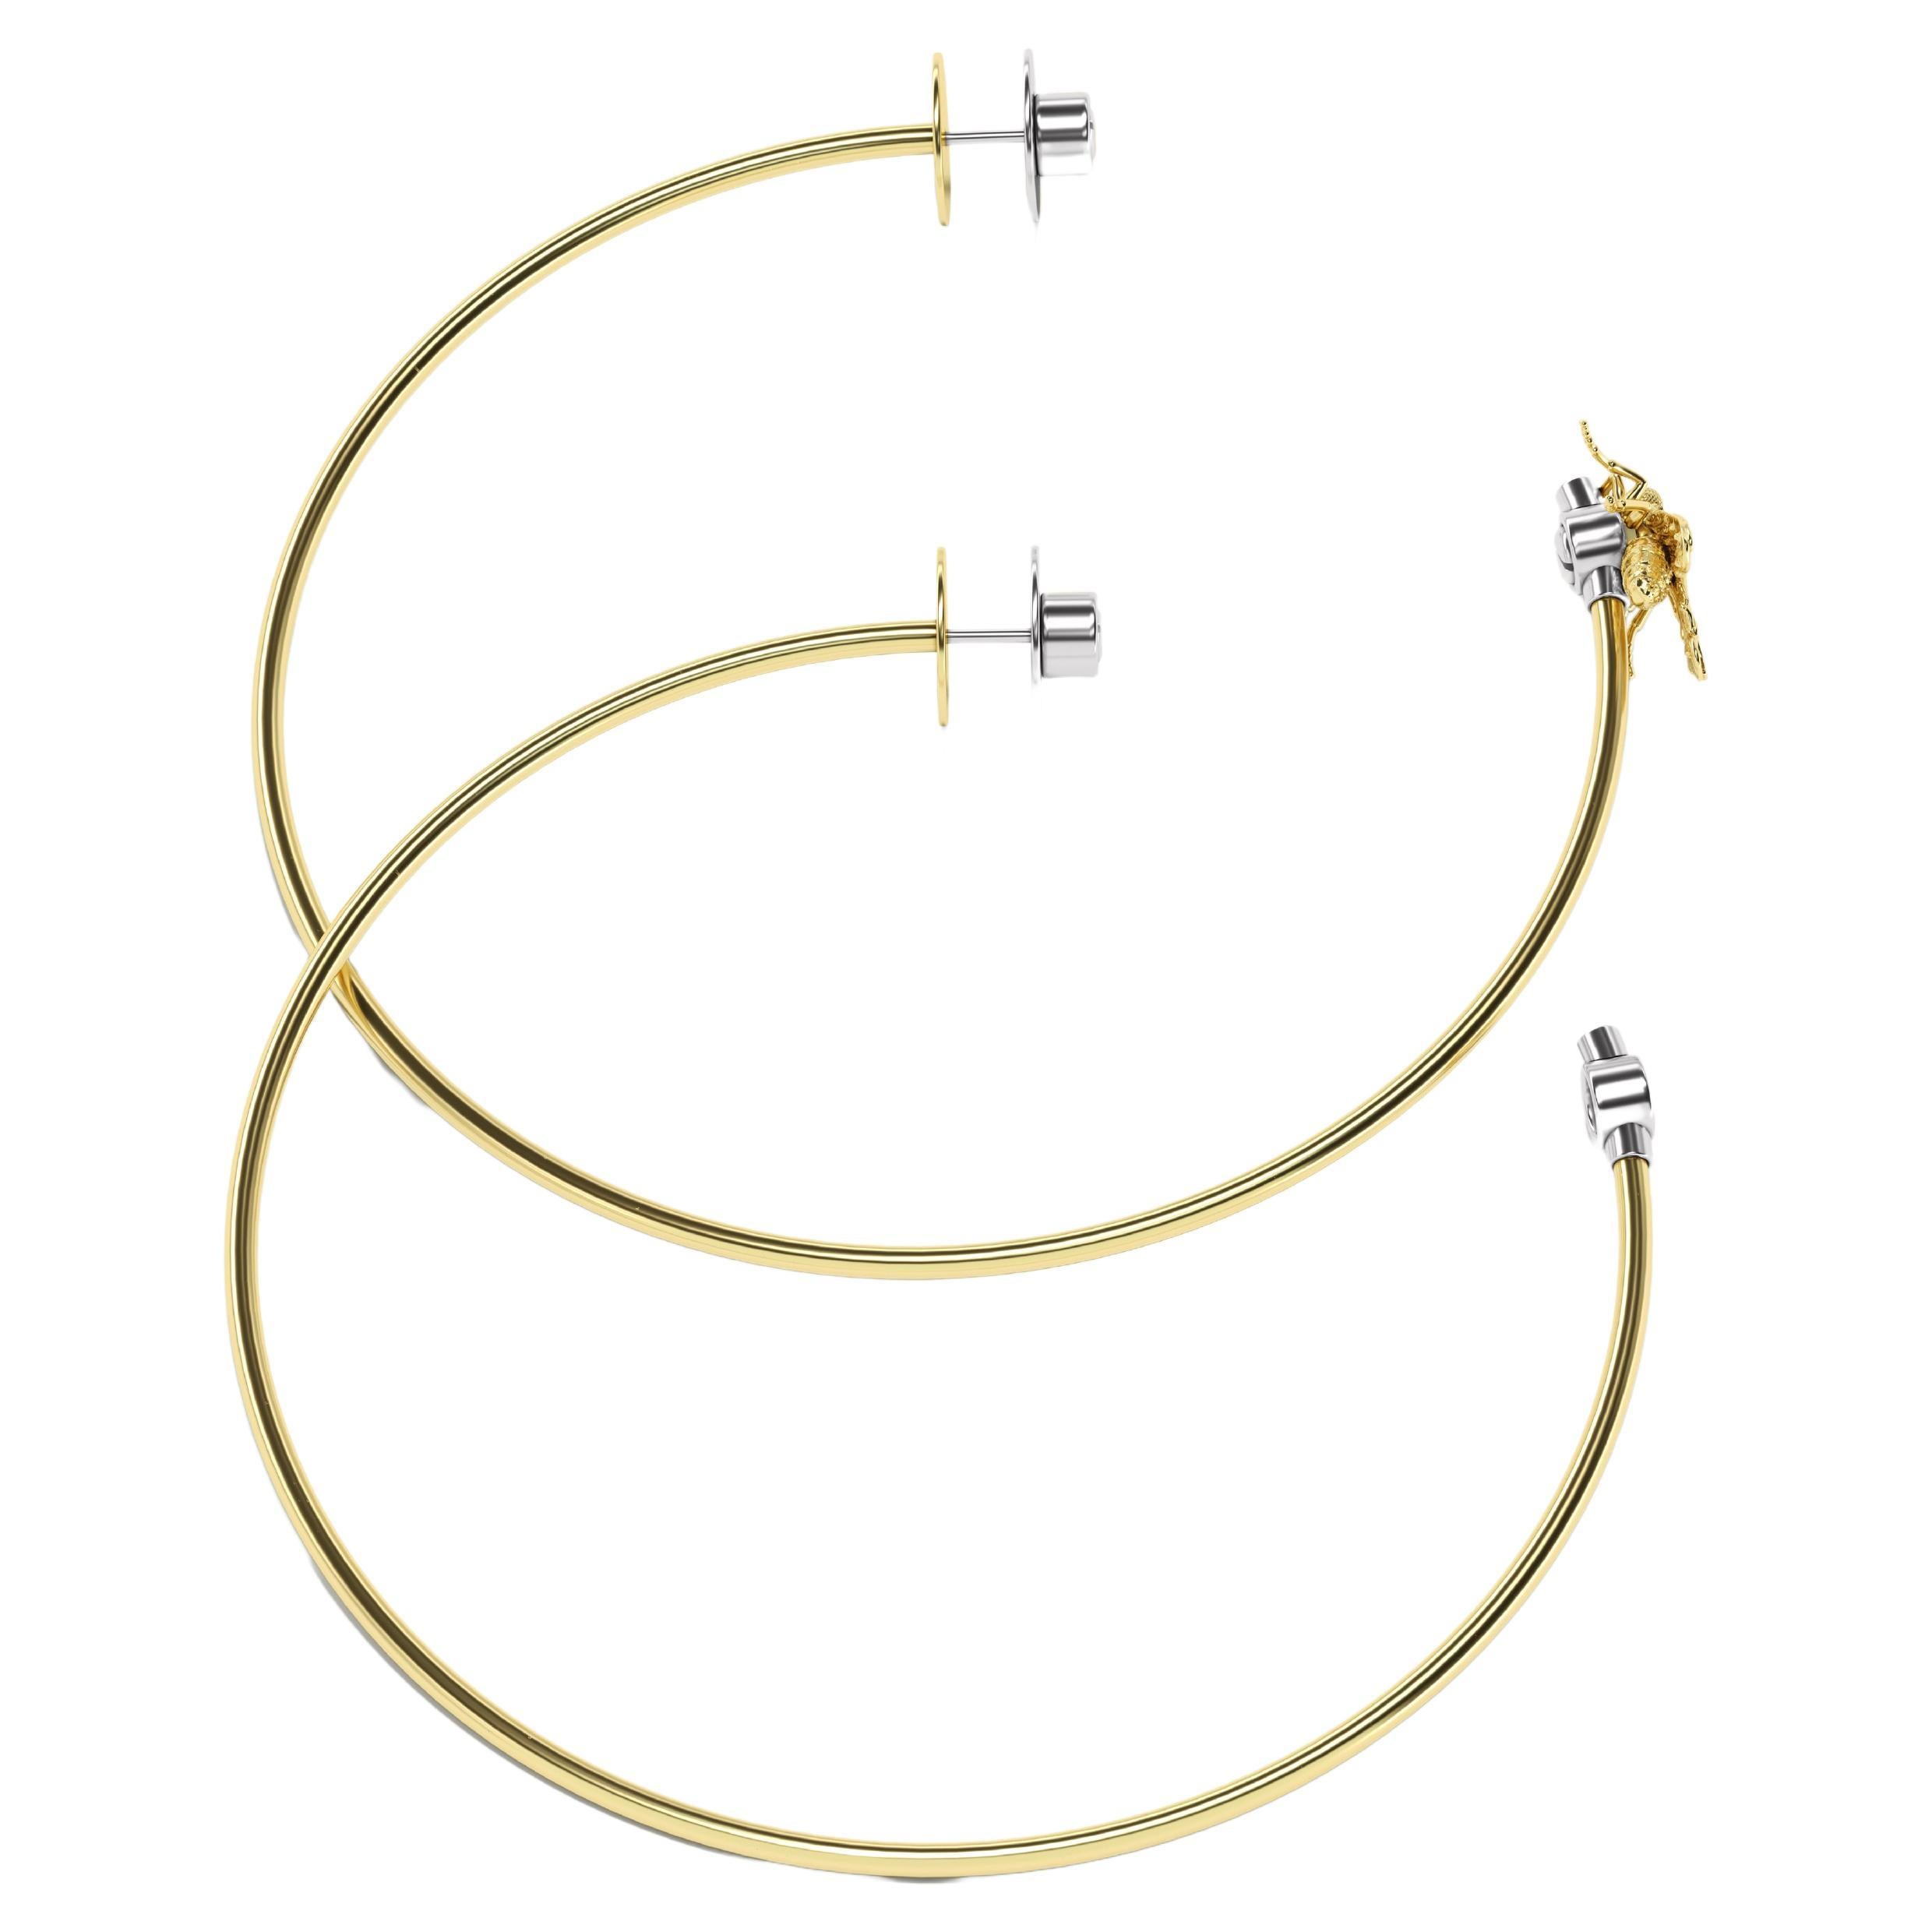 Pair of hoop earrings (⌀ 90 mm) with removable Fly, 18K yellow gold.
The post and bracket are made of steel, which provides a secure closure of the earring and prevents allergic reactions.
For everyday wear, the owner can easily remove the Fly using